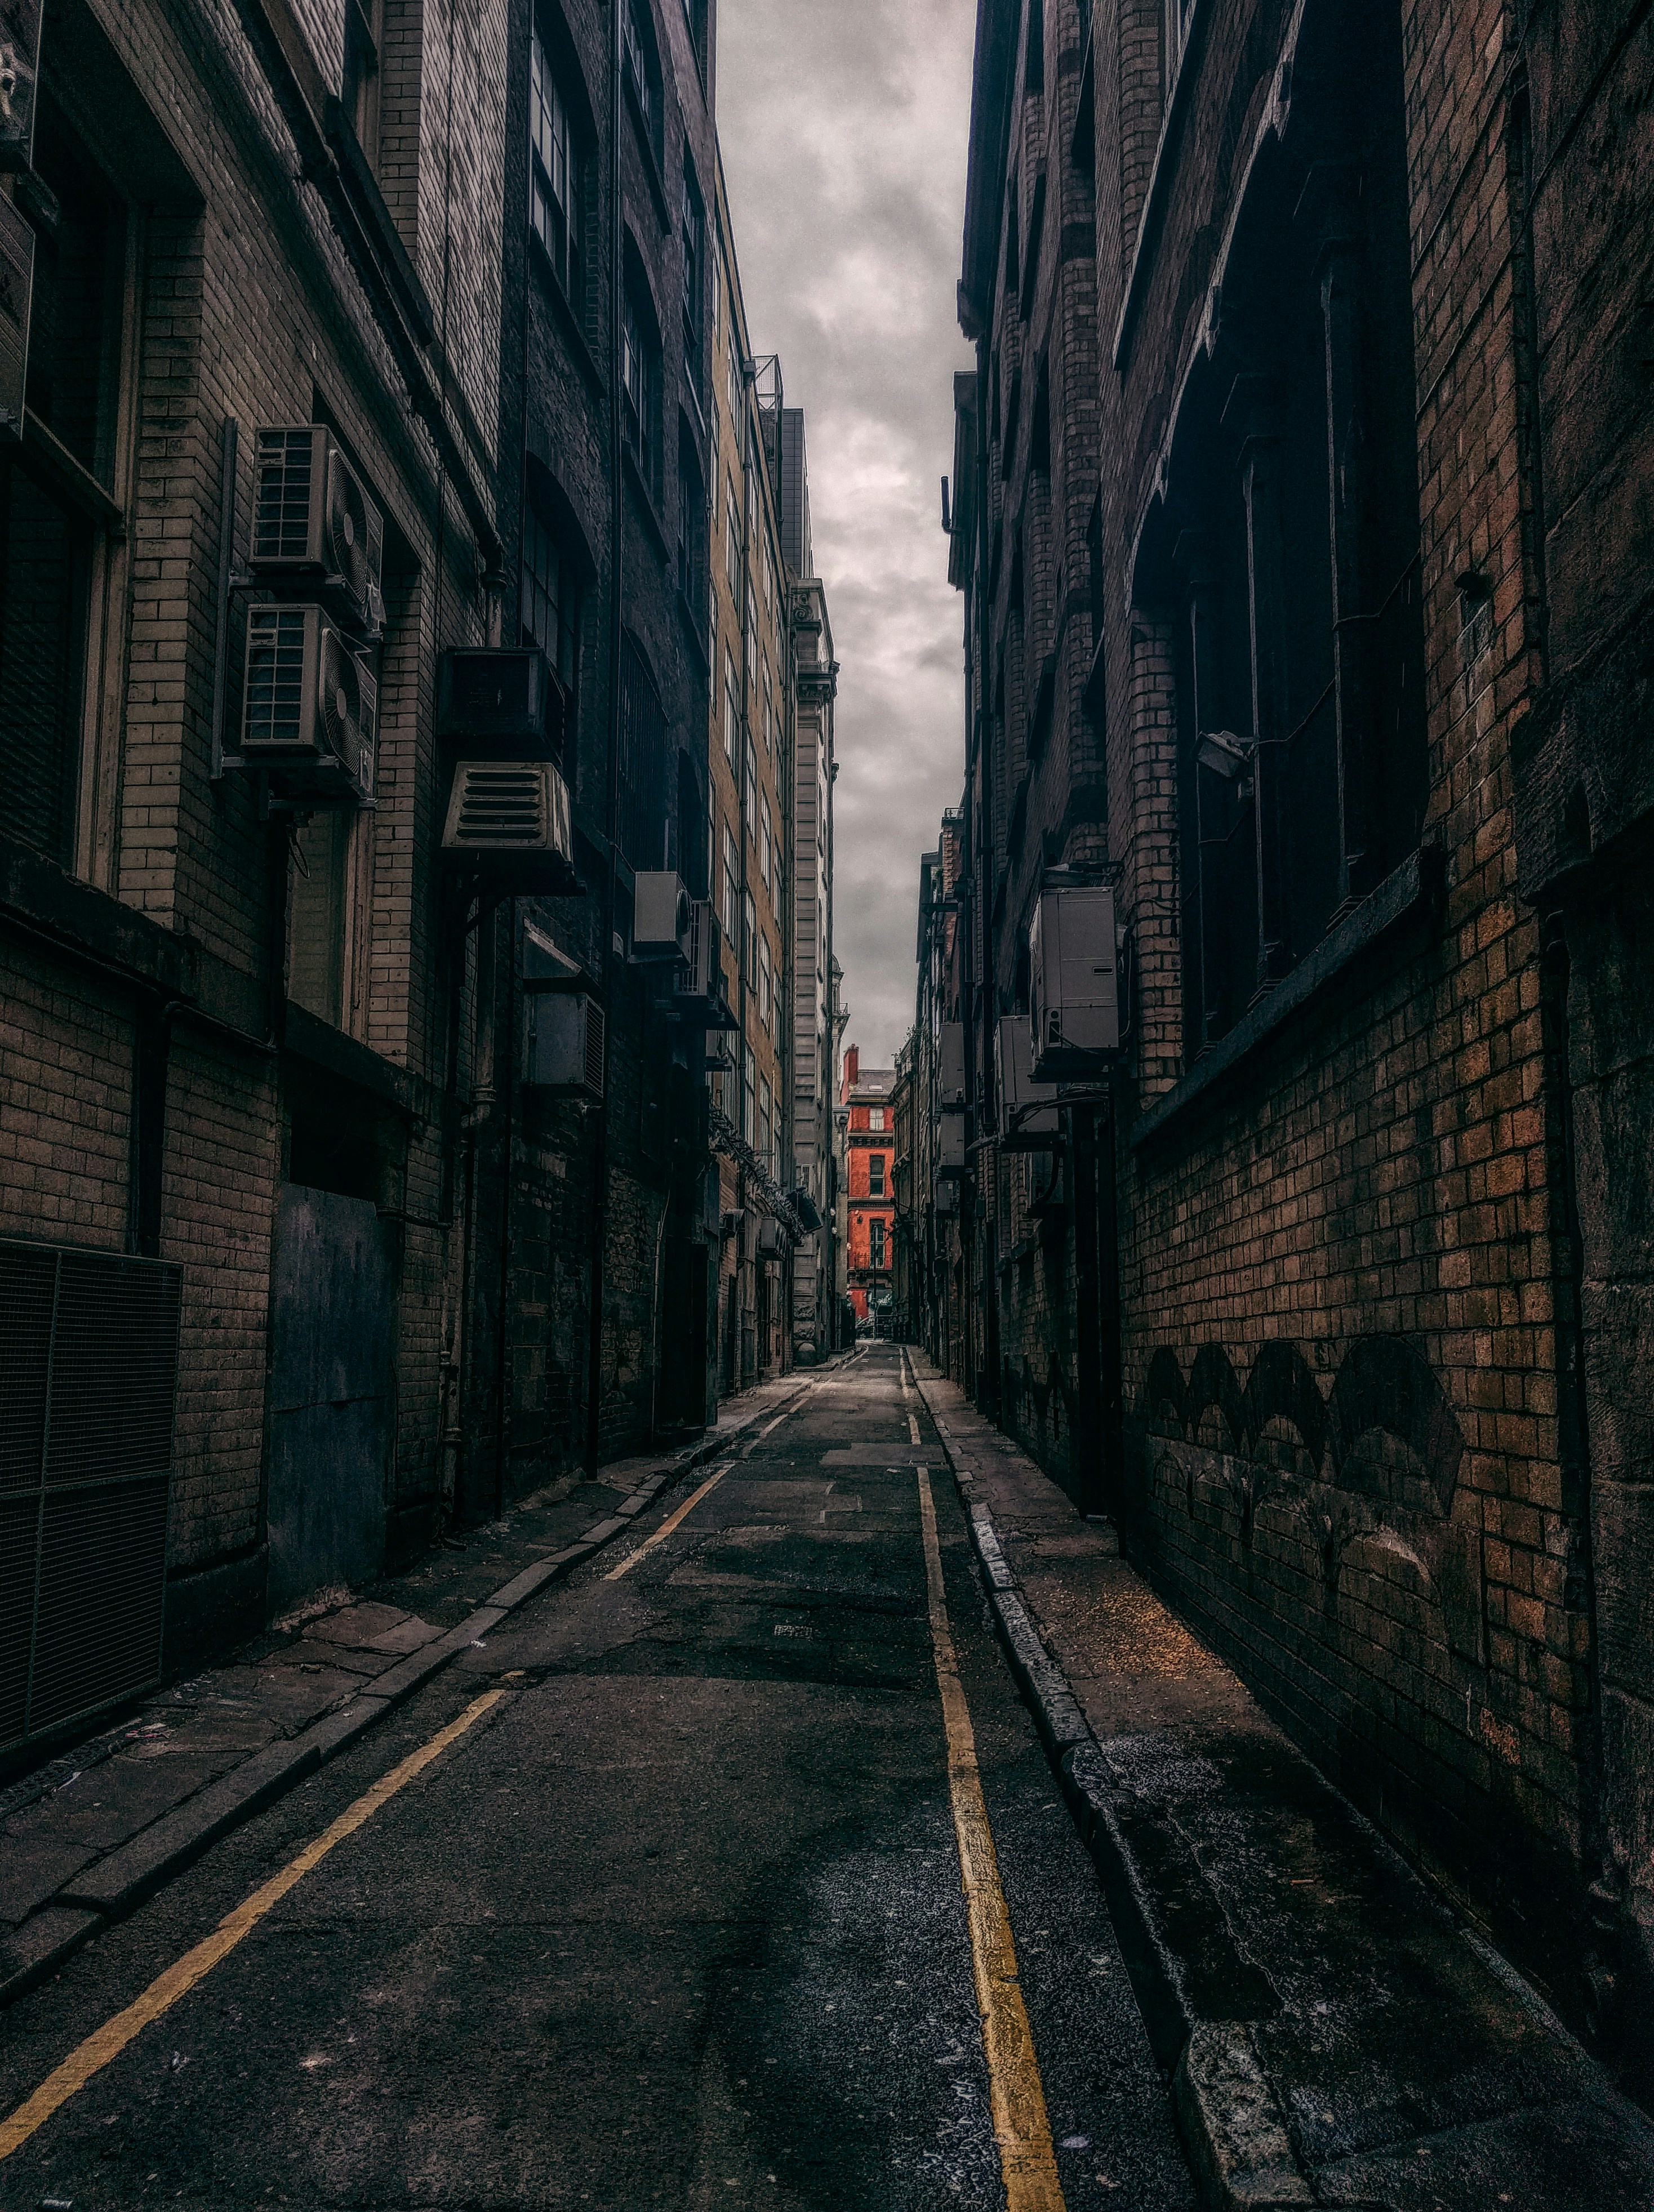 A grungy side street in liverpool.